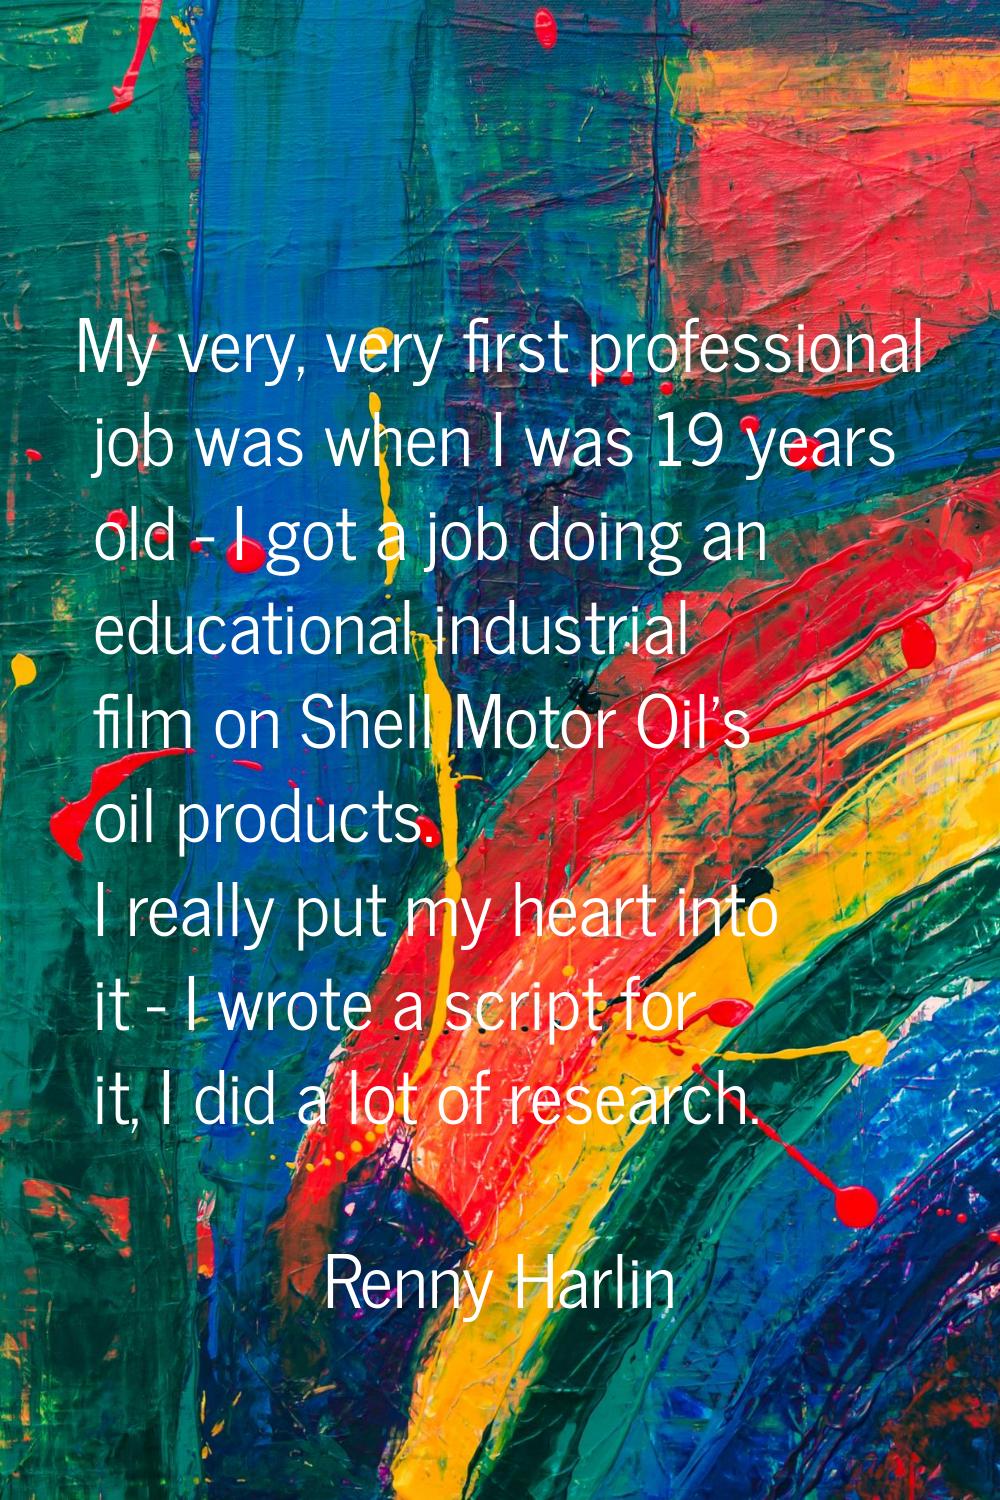 My very, very first professional job was when I was 19 years old - I got a job doing an educational